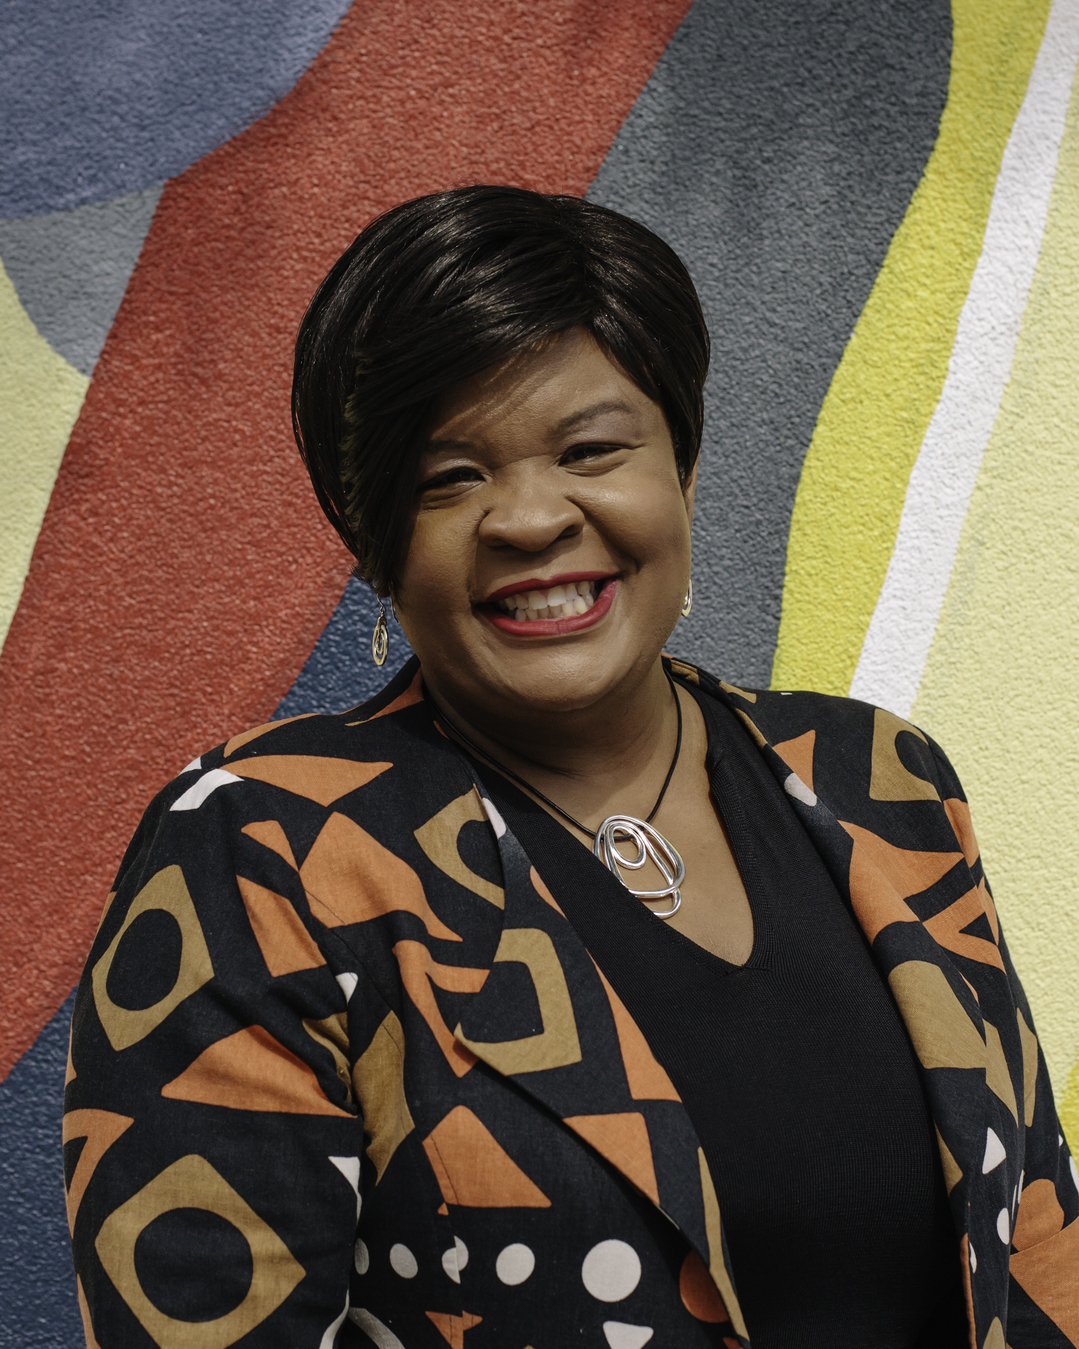 Image of a black woman with straight short black hair standing in front of a colorful backdrop, smiling and wearing a geometric patterned jacket.